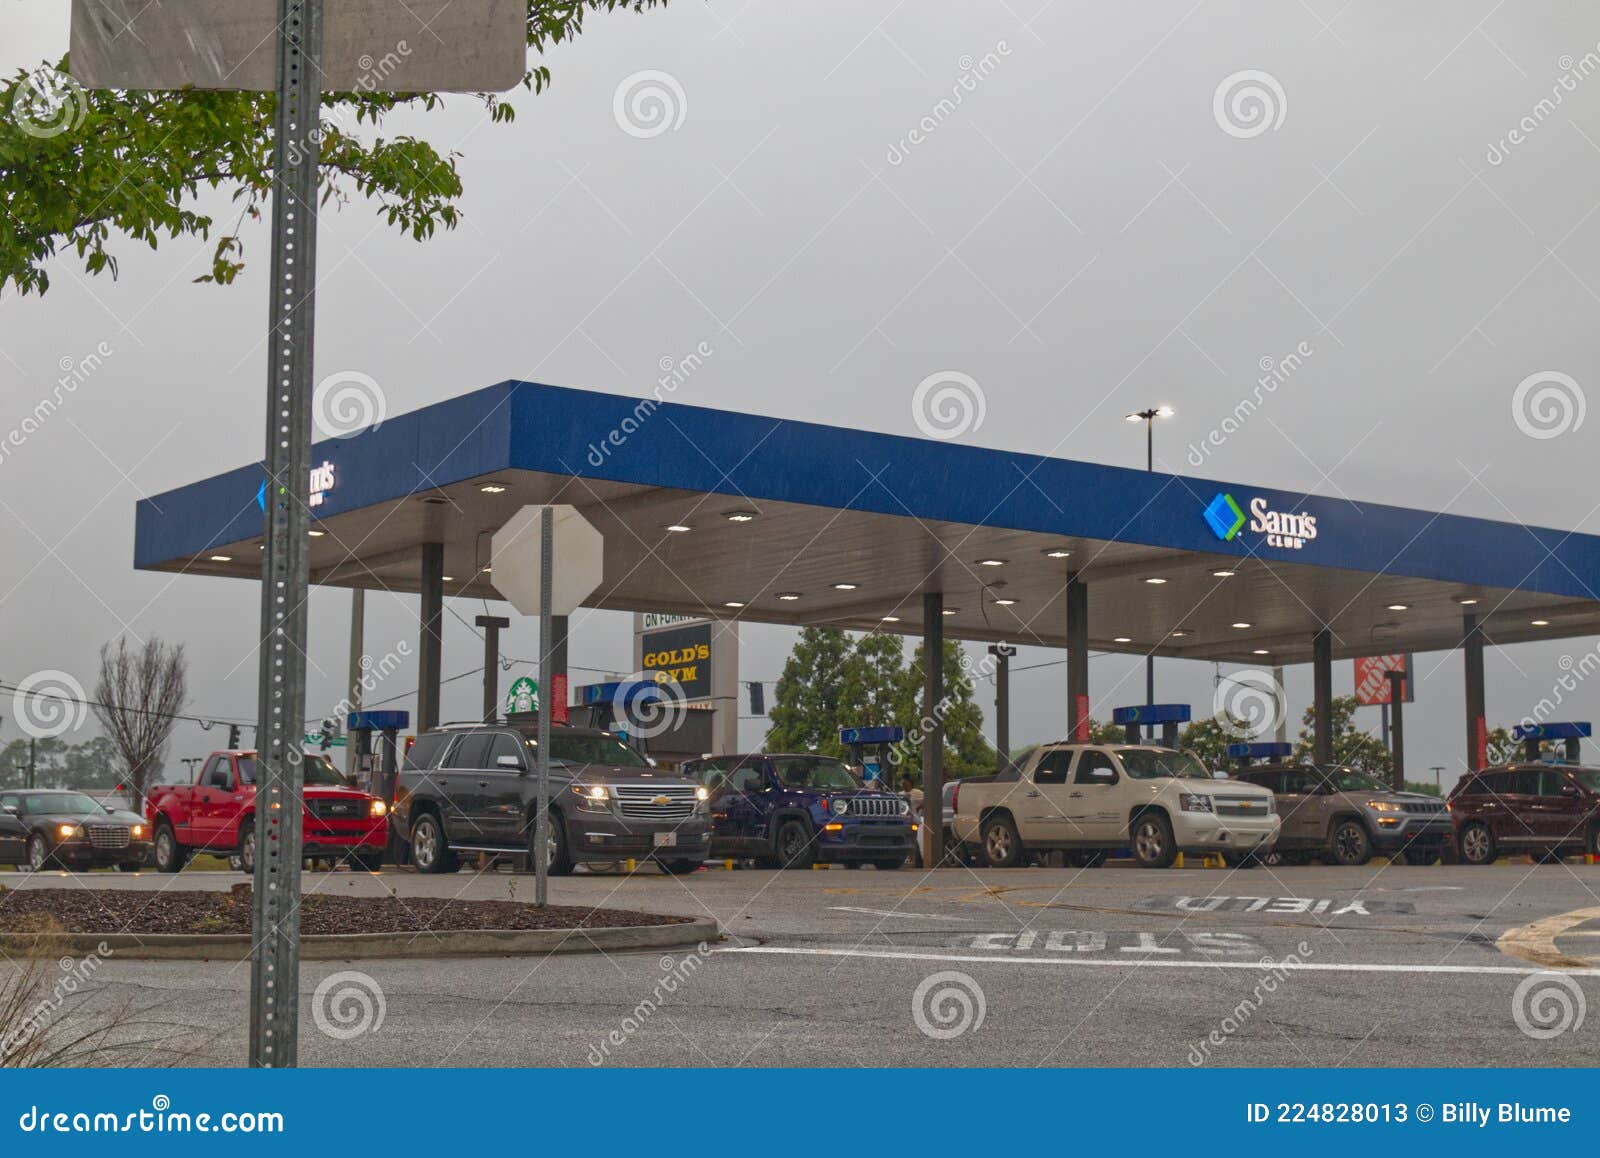 Sams Club Gas Panic Lines Colonial Pipeline Hack Editorial Stock Photo -  Image of lines, fuel: 224828013